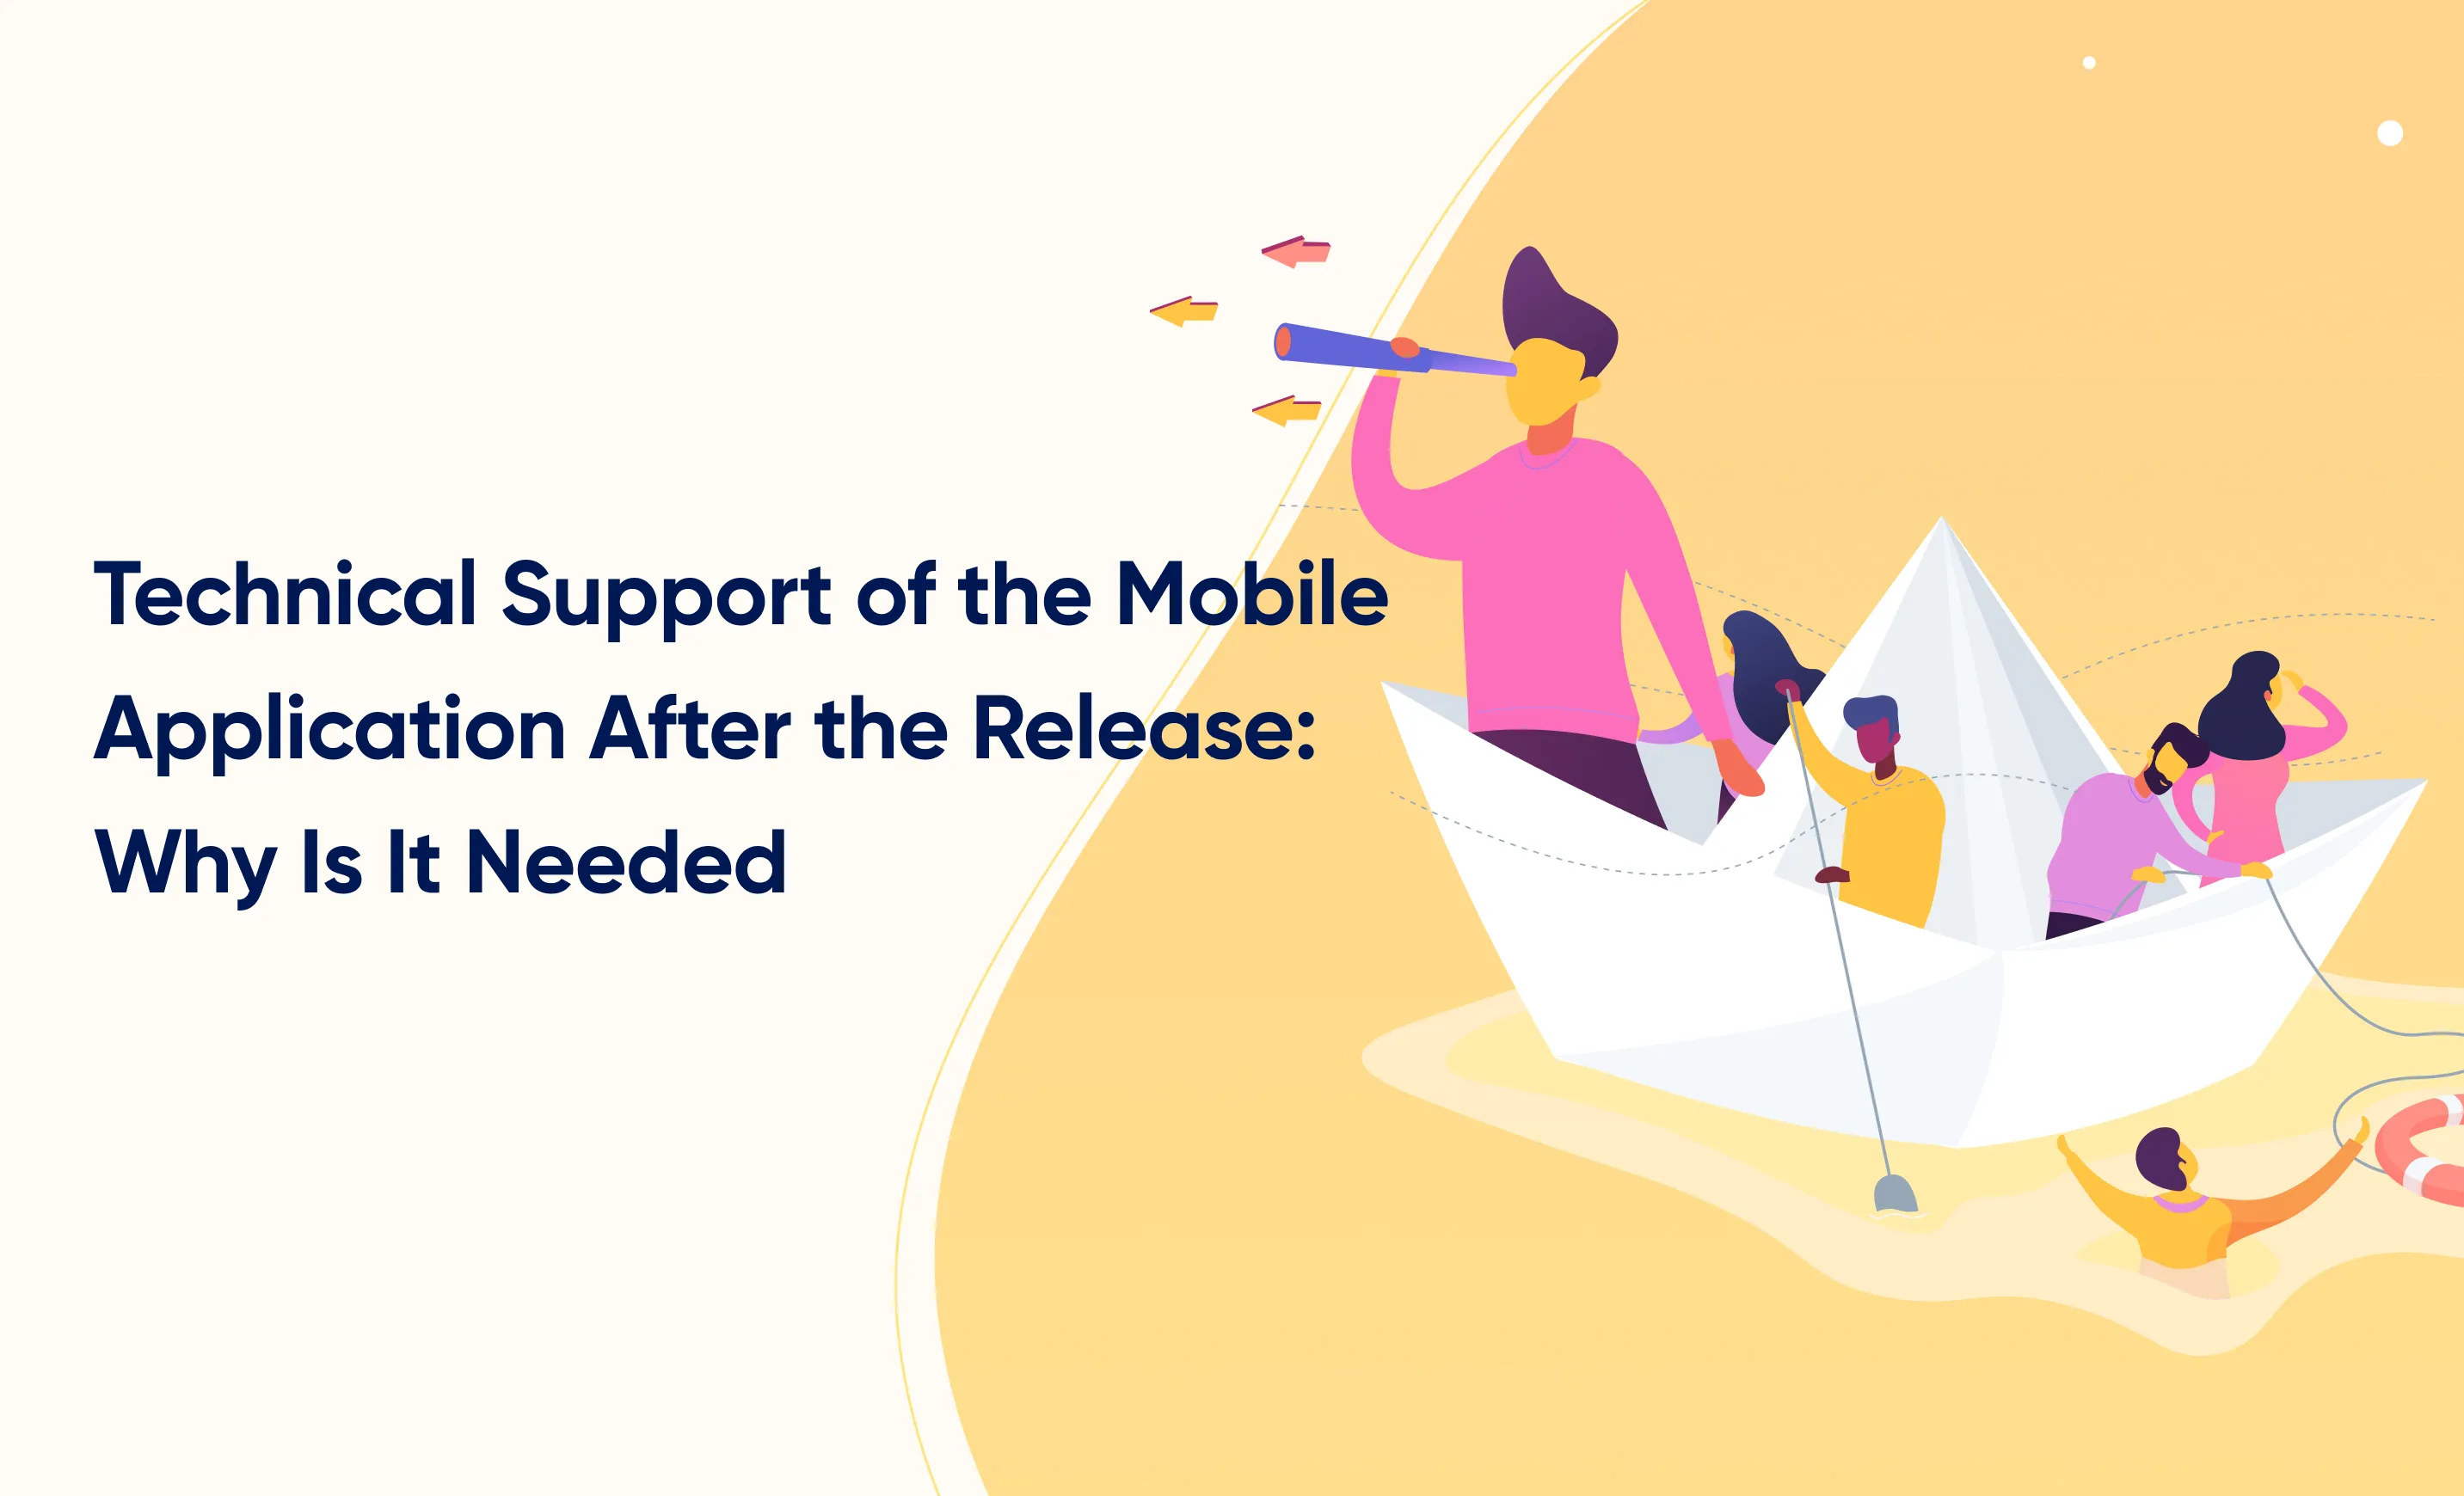 Technical Support of the Mobile Application After the Release: Why Is It Needed